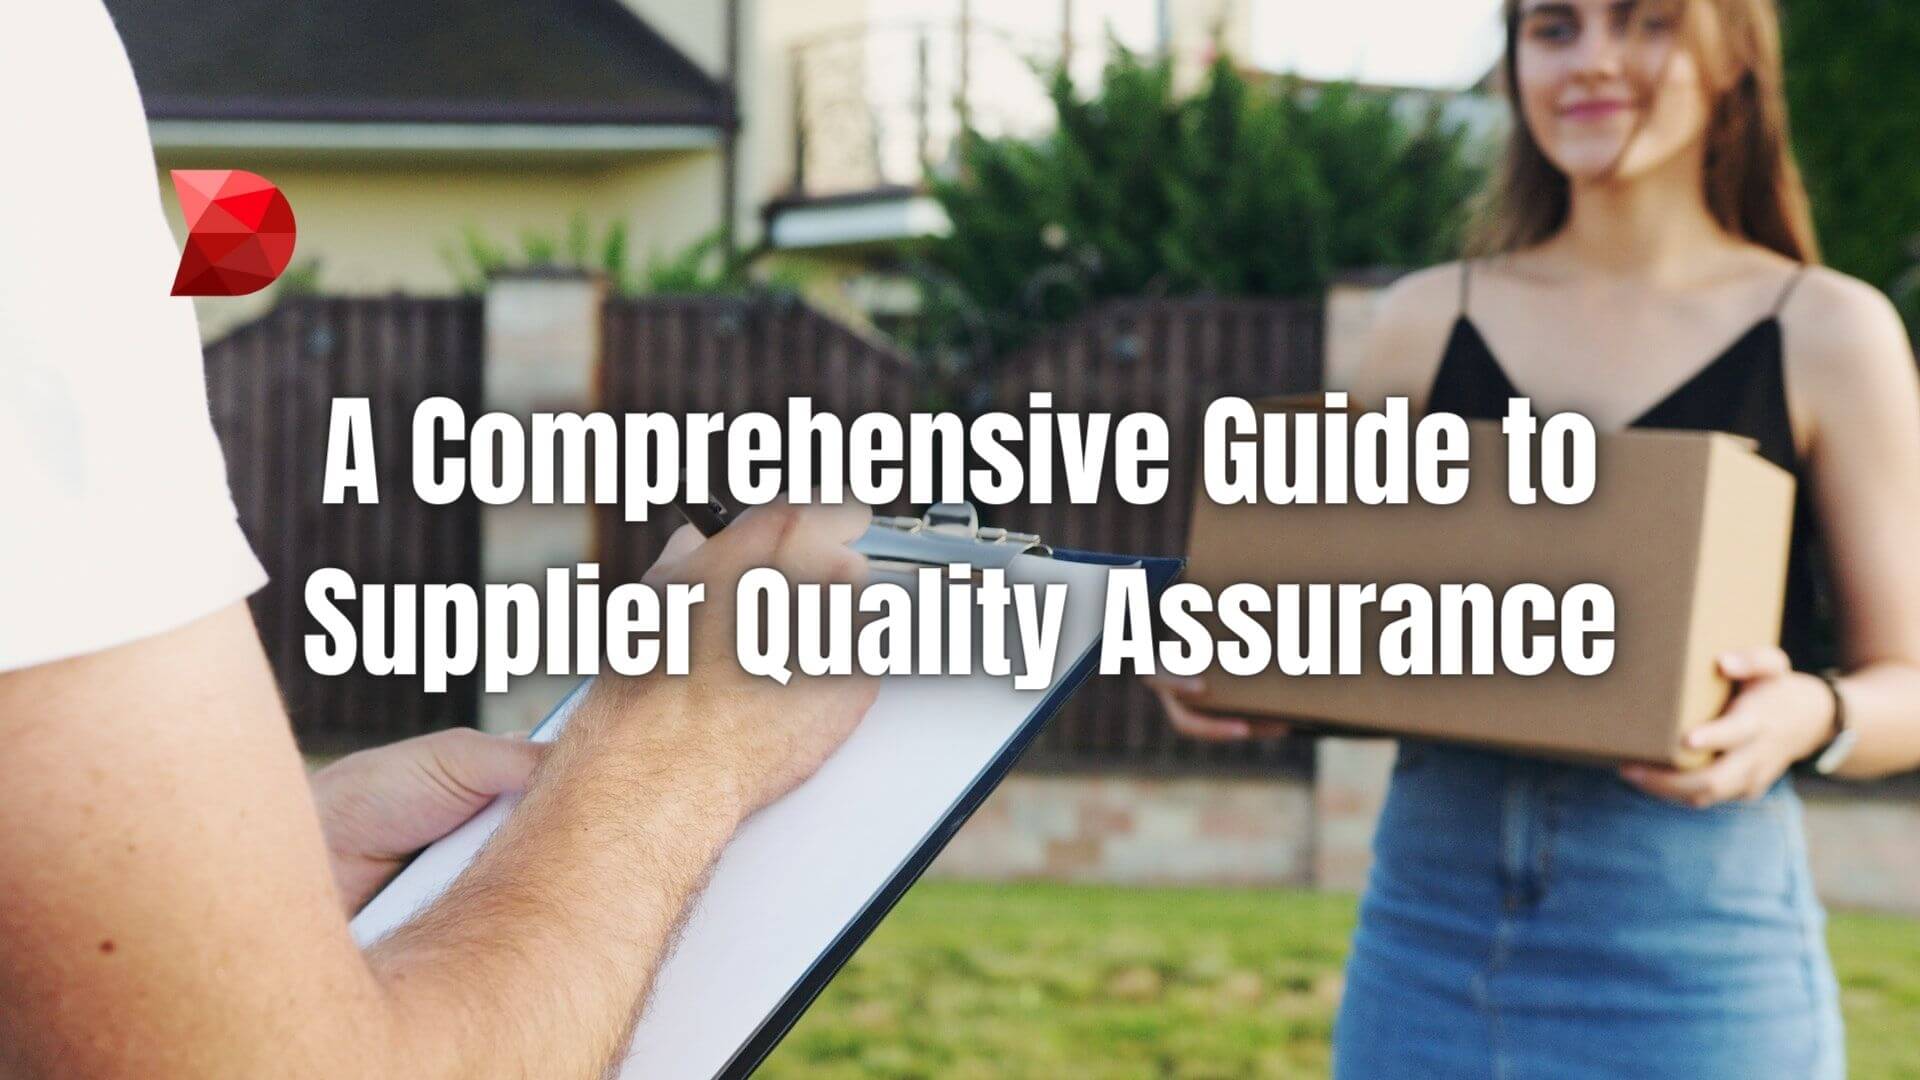 We will discuss Supplier Quality Assurance, the steps in conducting this process, and how you can create one using DataMyte. Learn more!